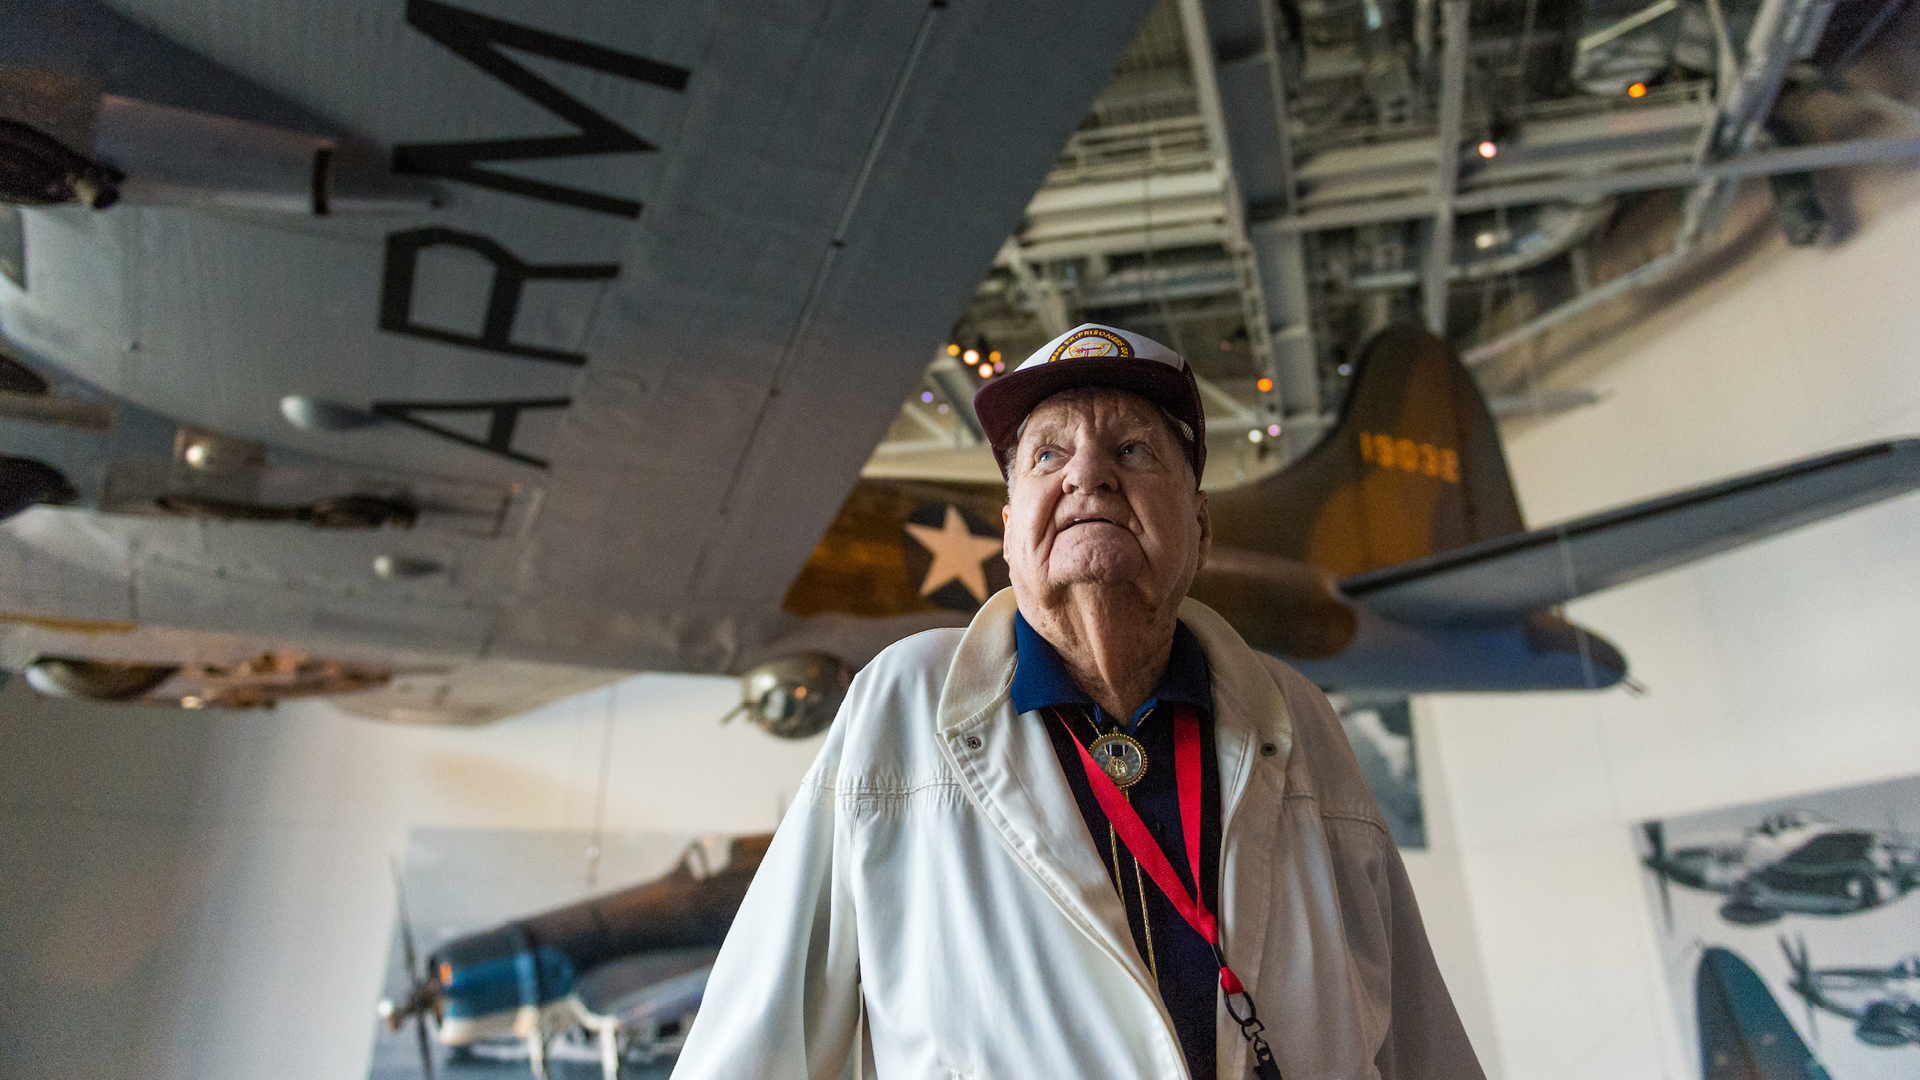 WWII Veteran in front of hanging airplane at the National WWII Museum in New Orleans